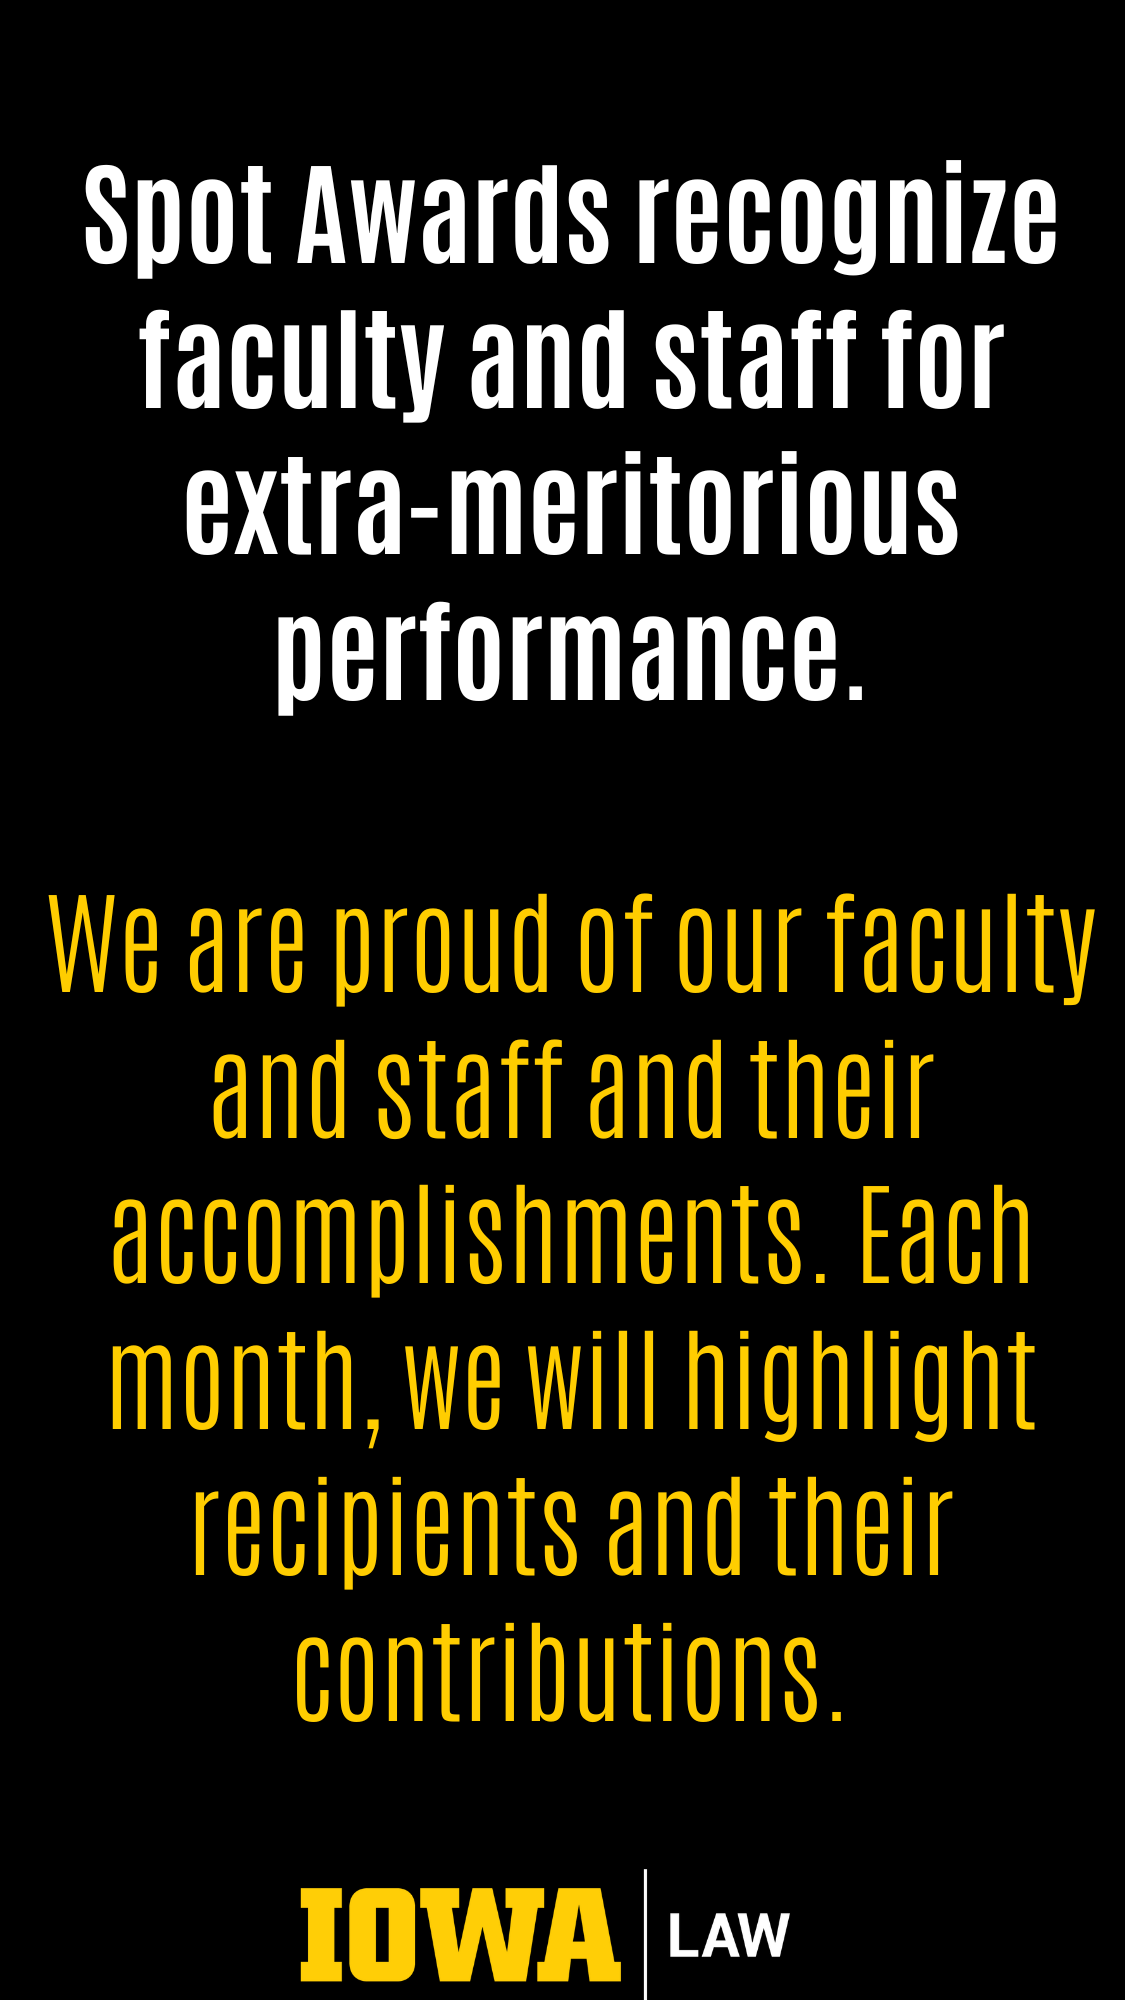 Spot Awards recognize faculty and staff for extra-meritorious performance.  We are proud of our faculty and staff and their accomplishments. Each month, we will highlight recipients and their contributions.